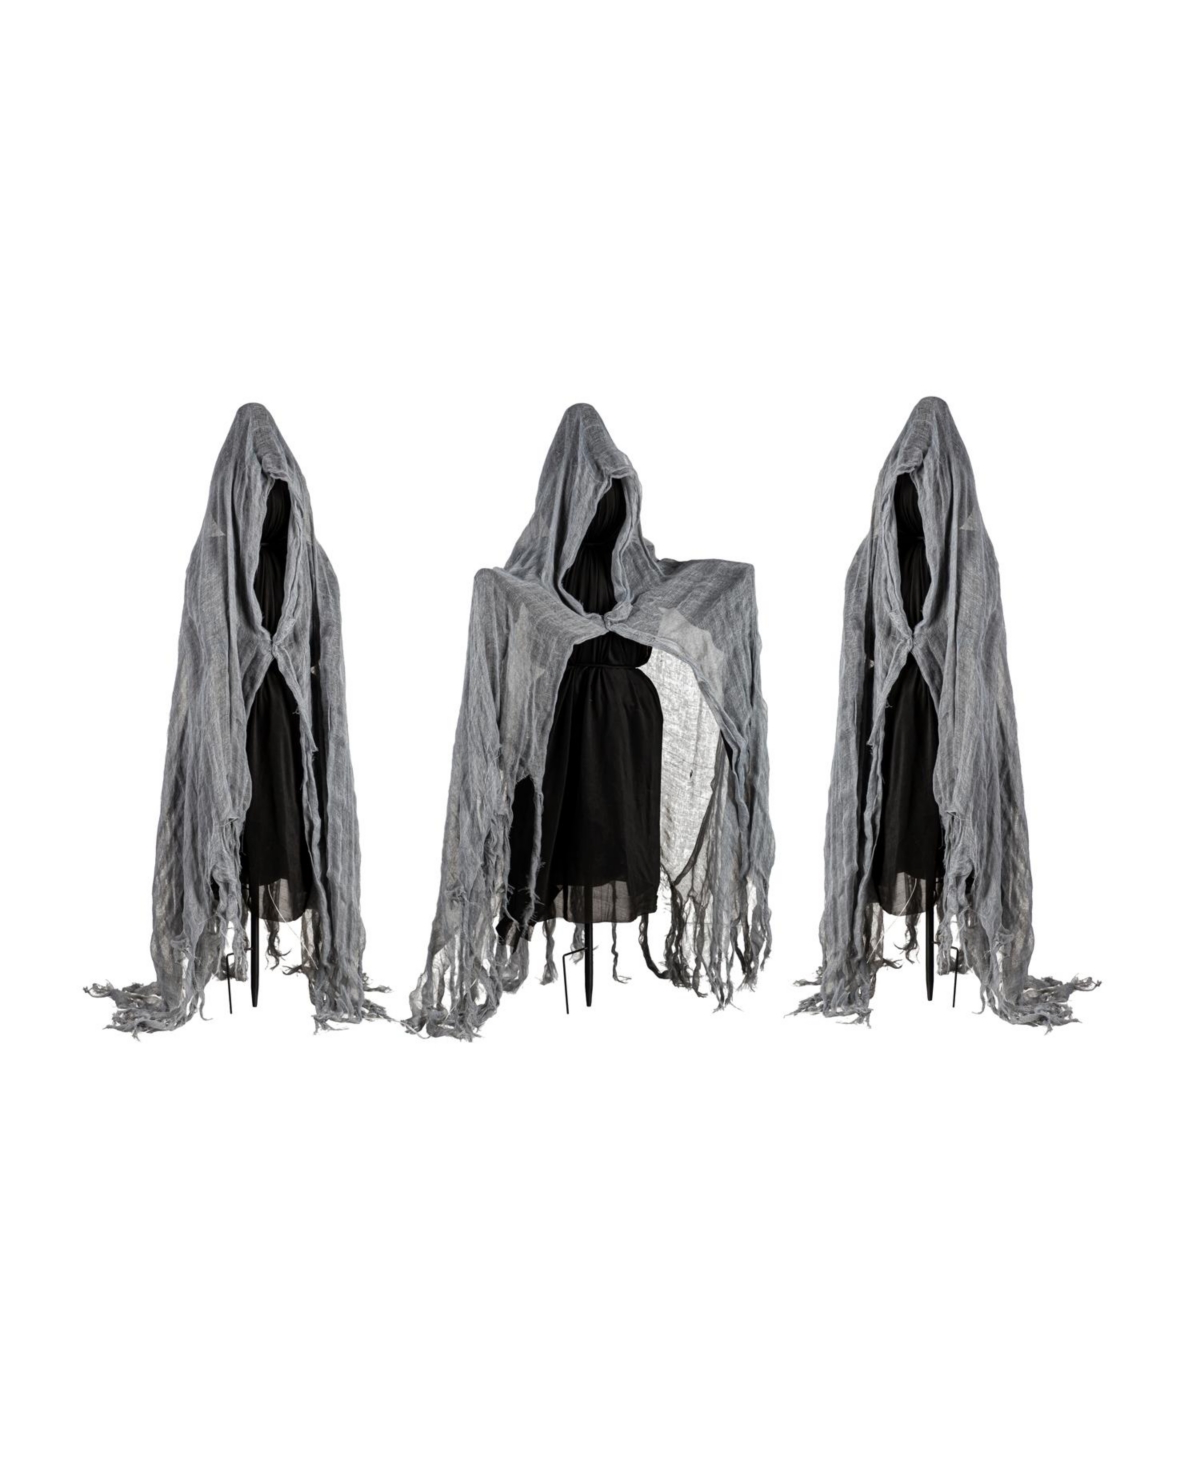 Lighted Halloween Reaper Stakes, Set of 3 - Gray